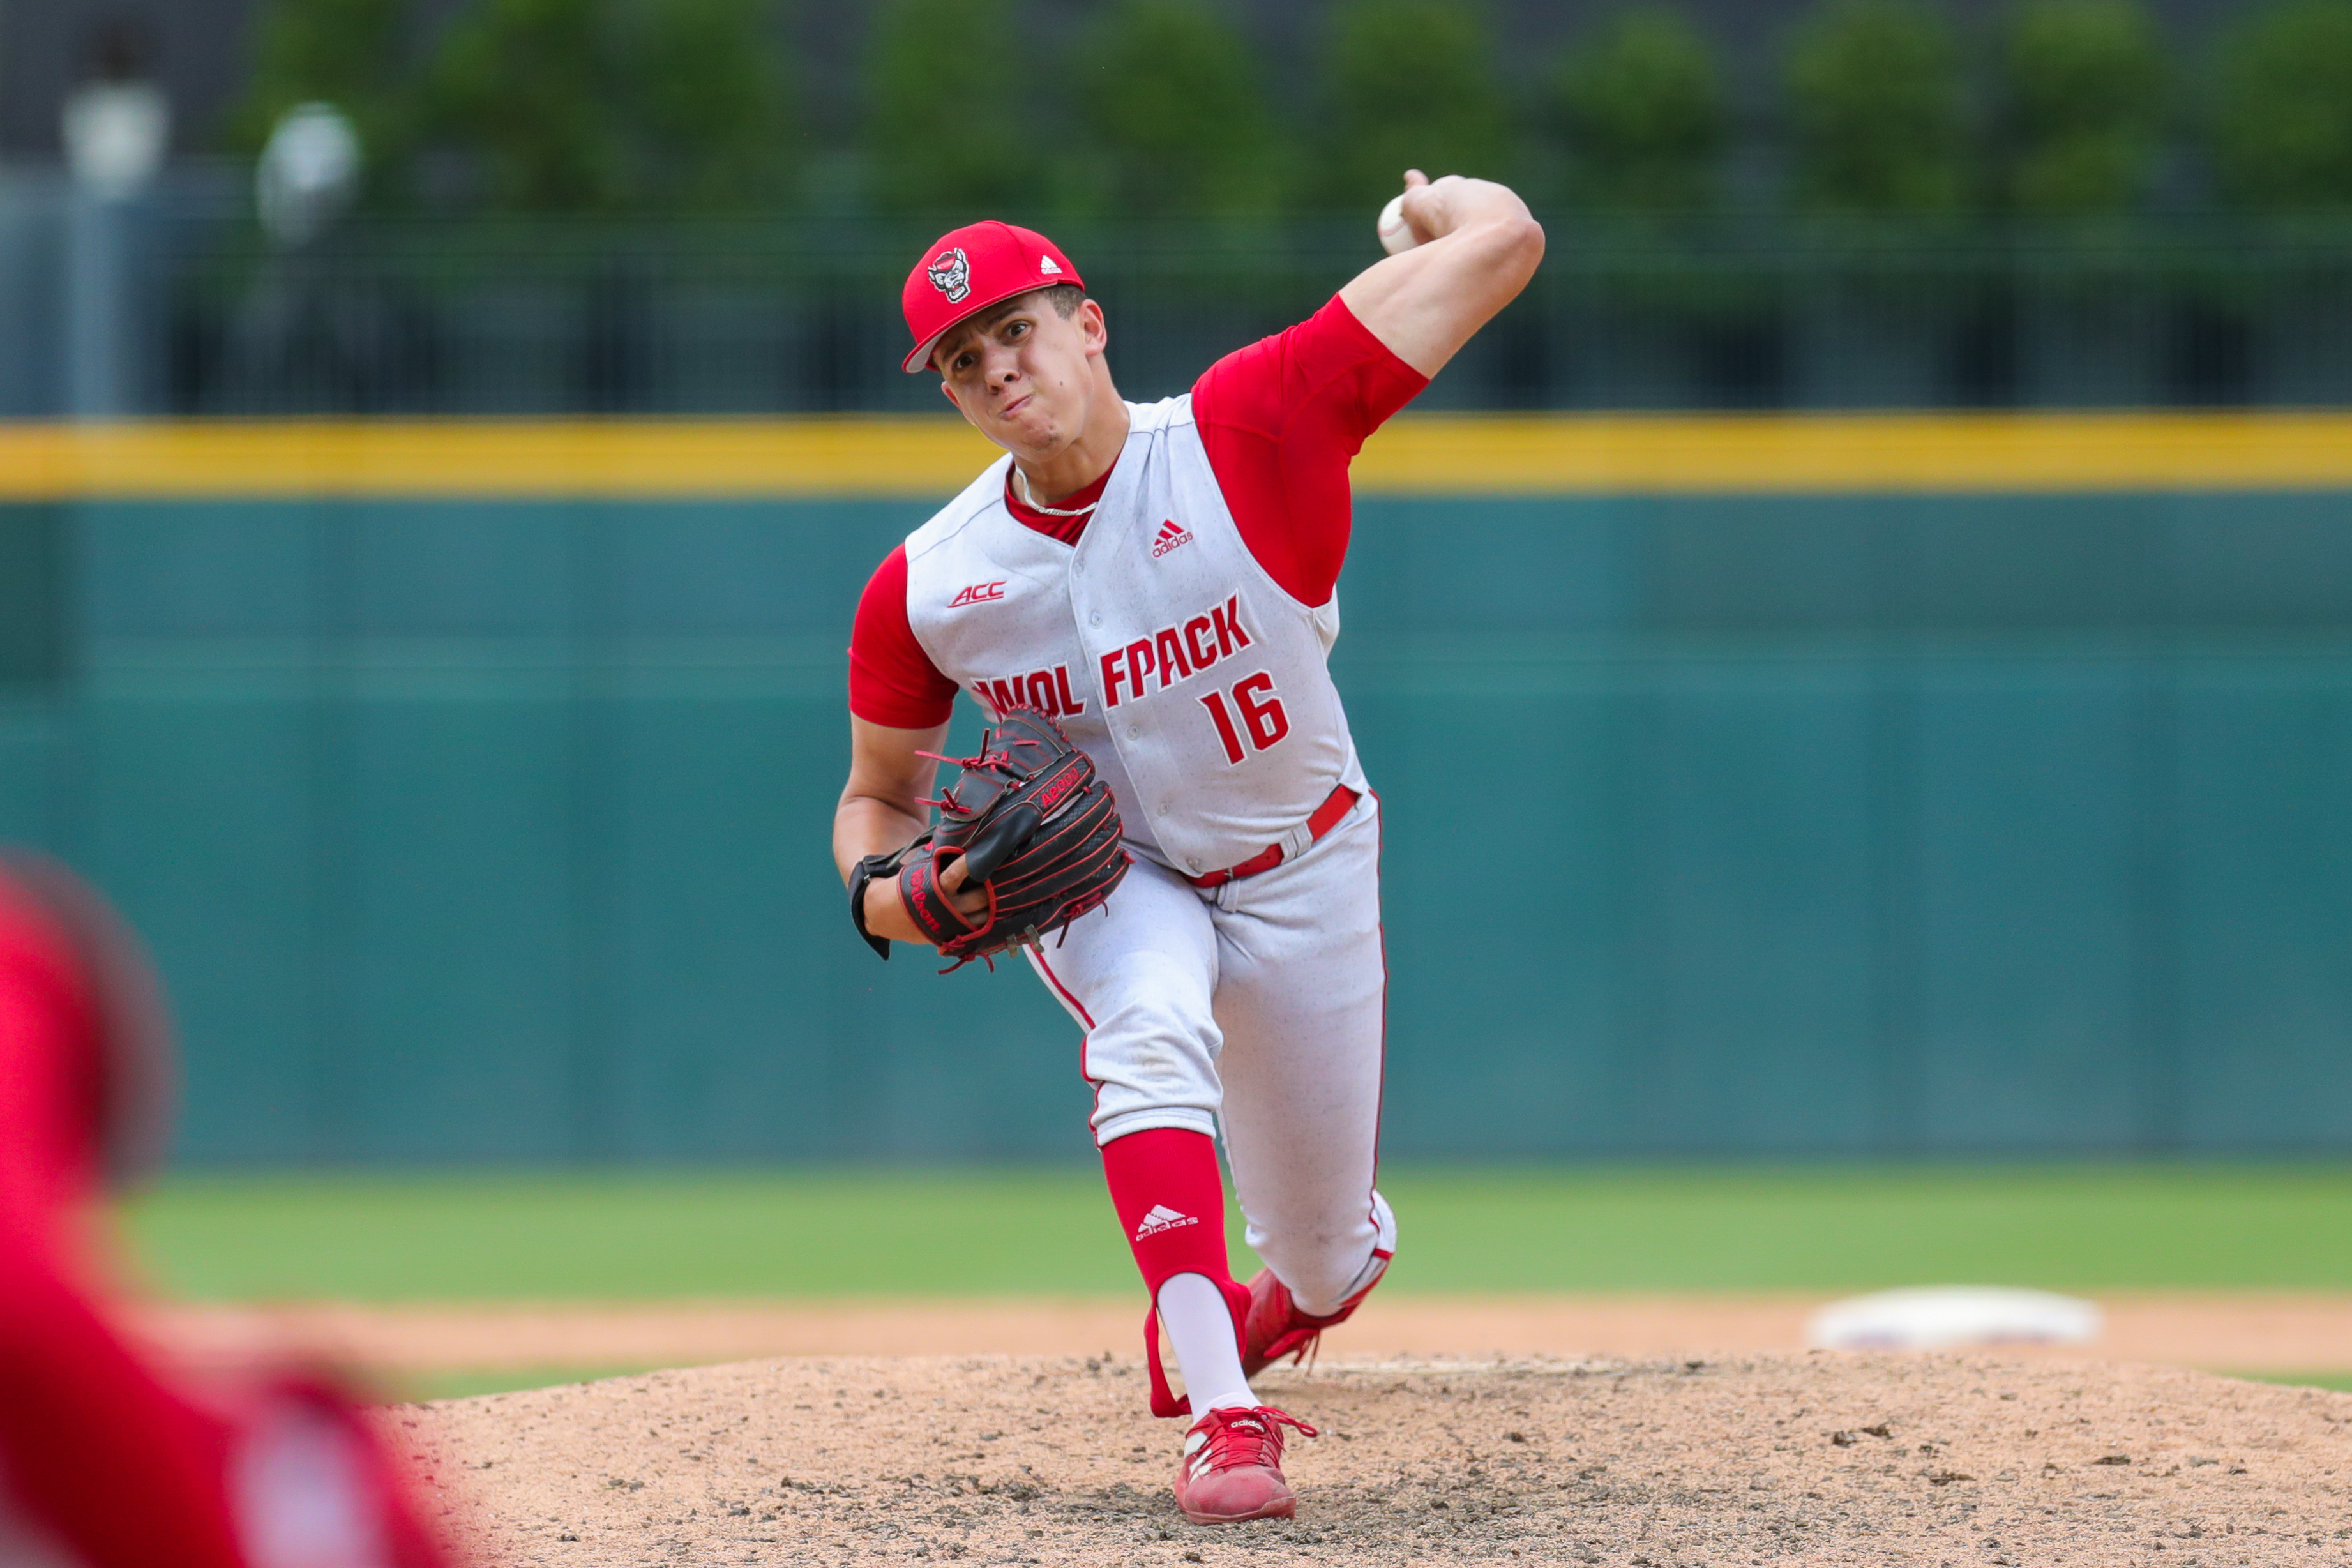 COLLEGE BASEBALL: MAY 24 ACC Championship - NC State v Wake Forest